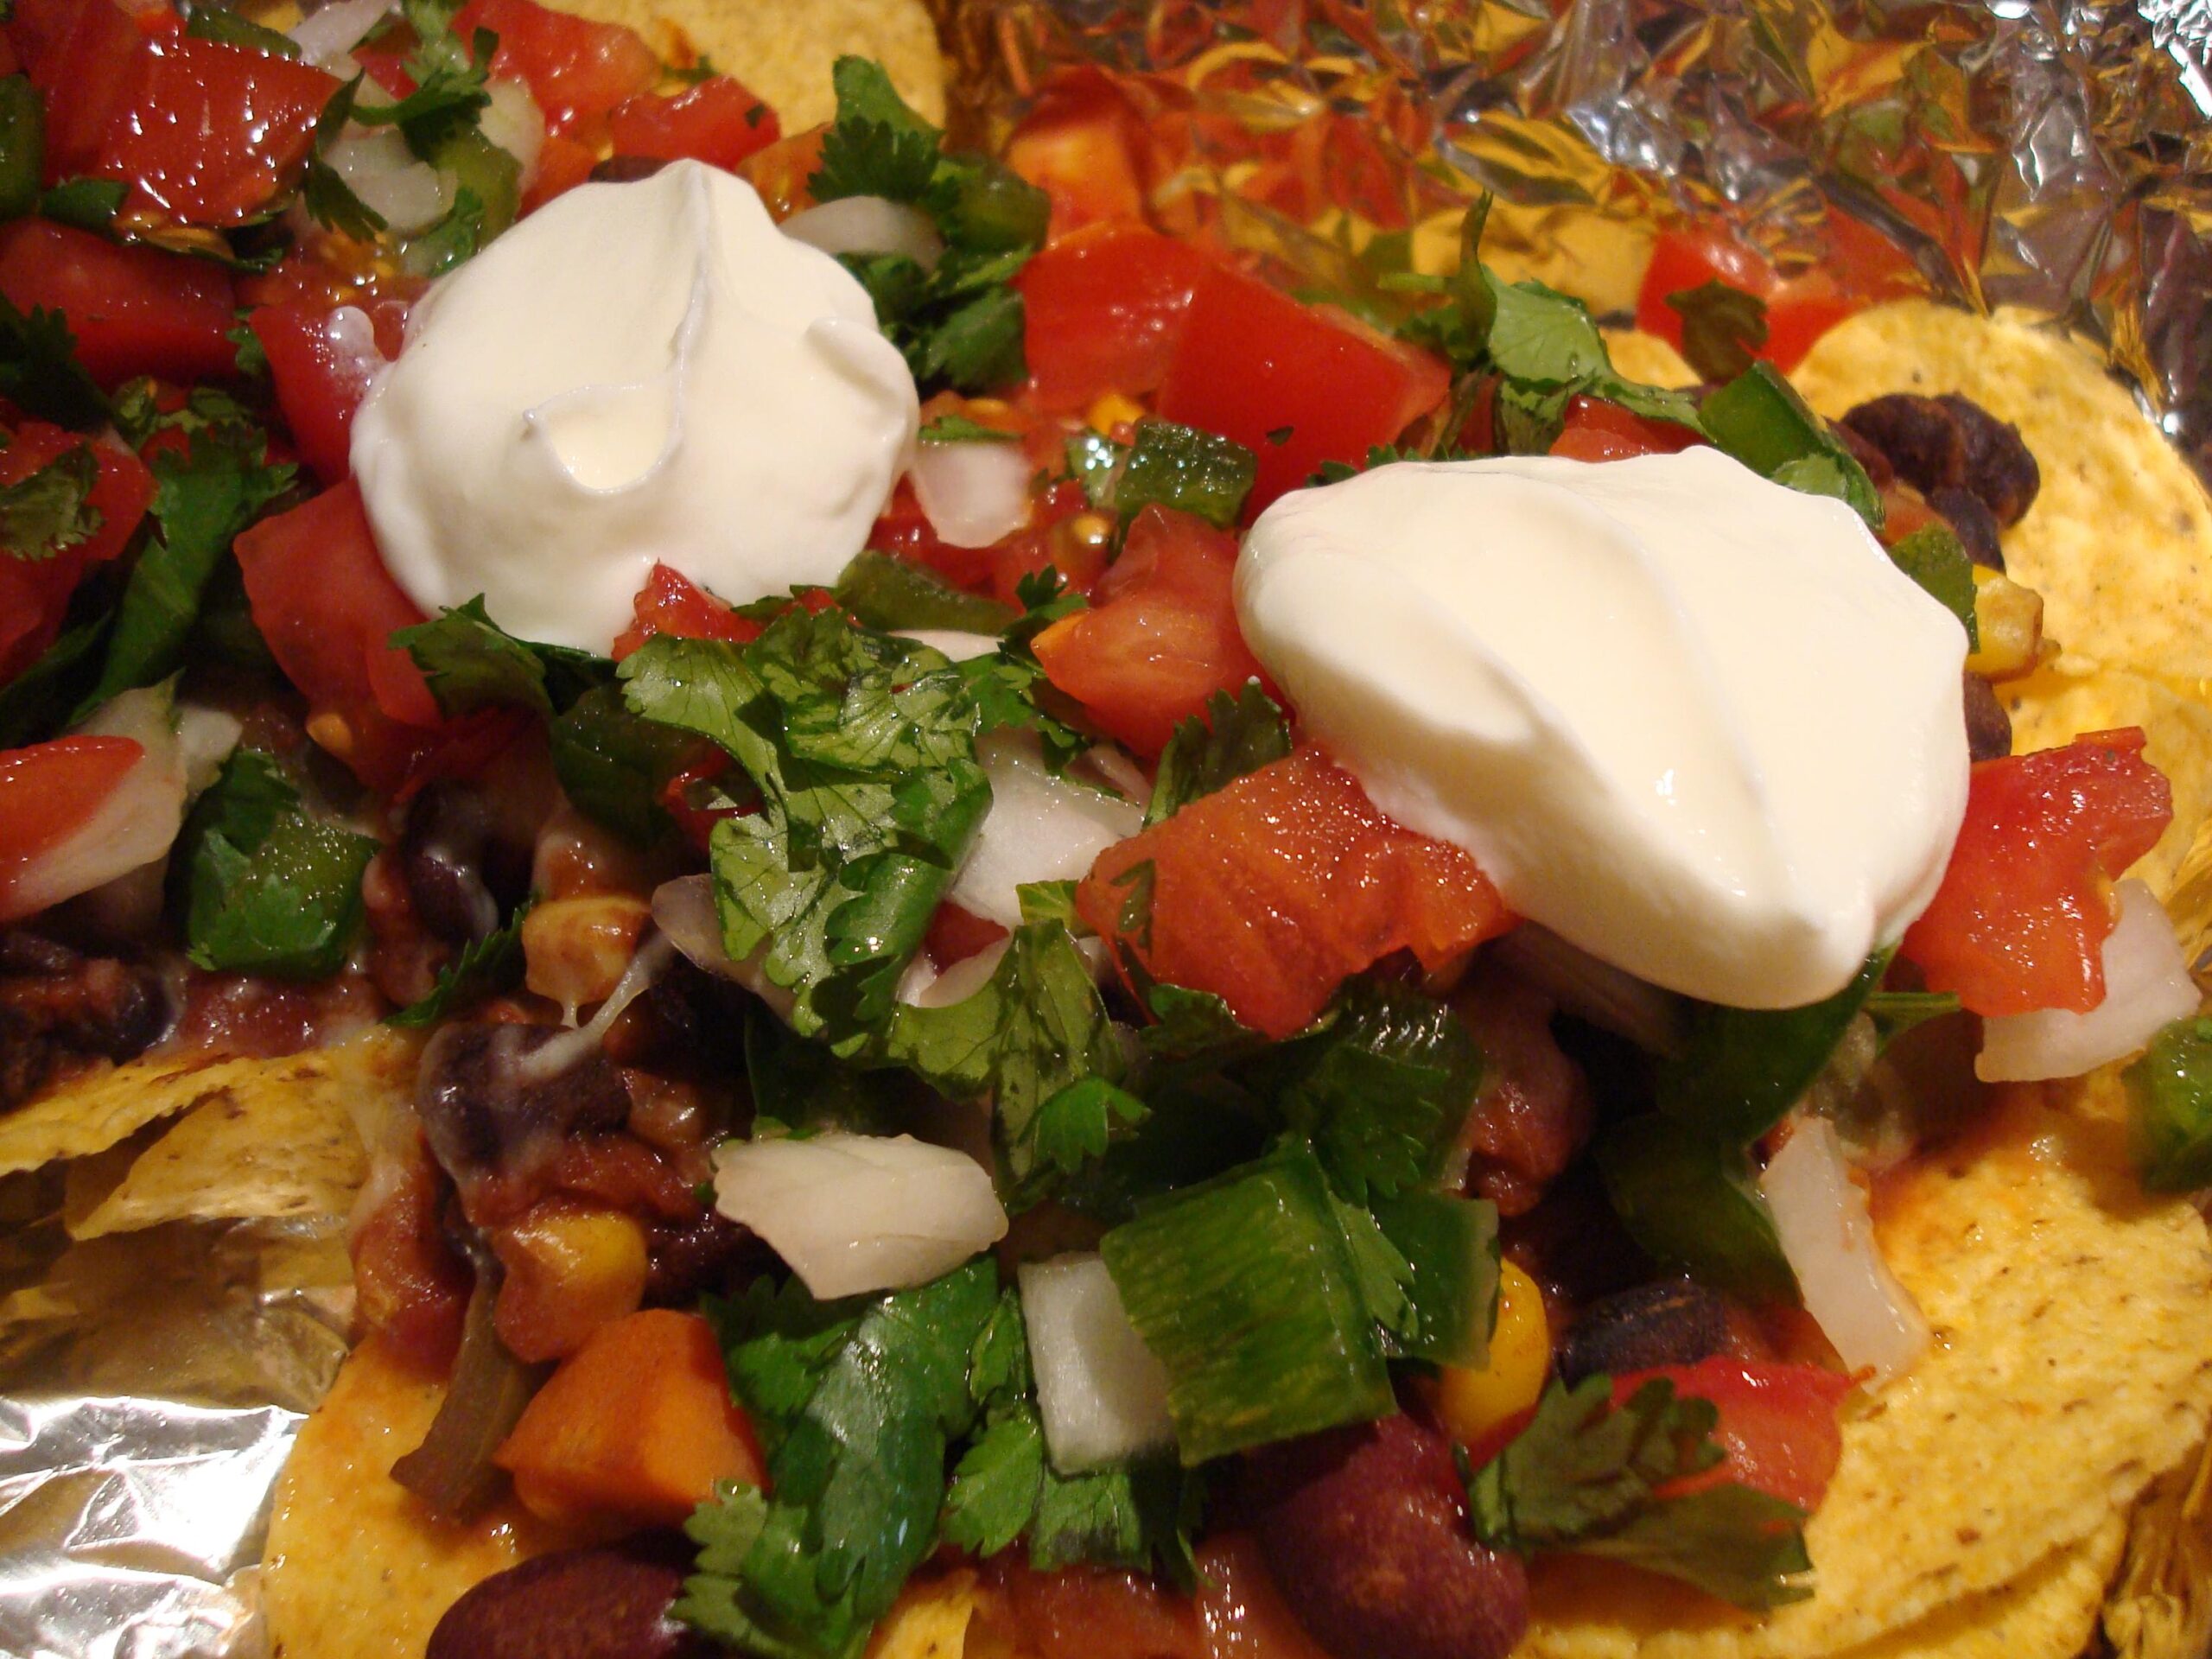  This nacho recipe is not only vegetarian, but also quick and easy to make